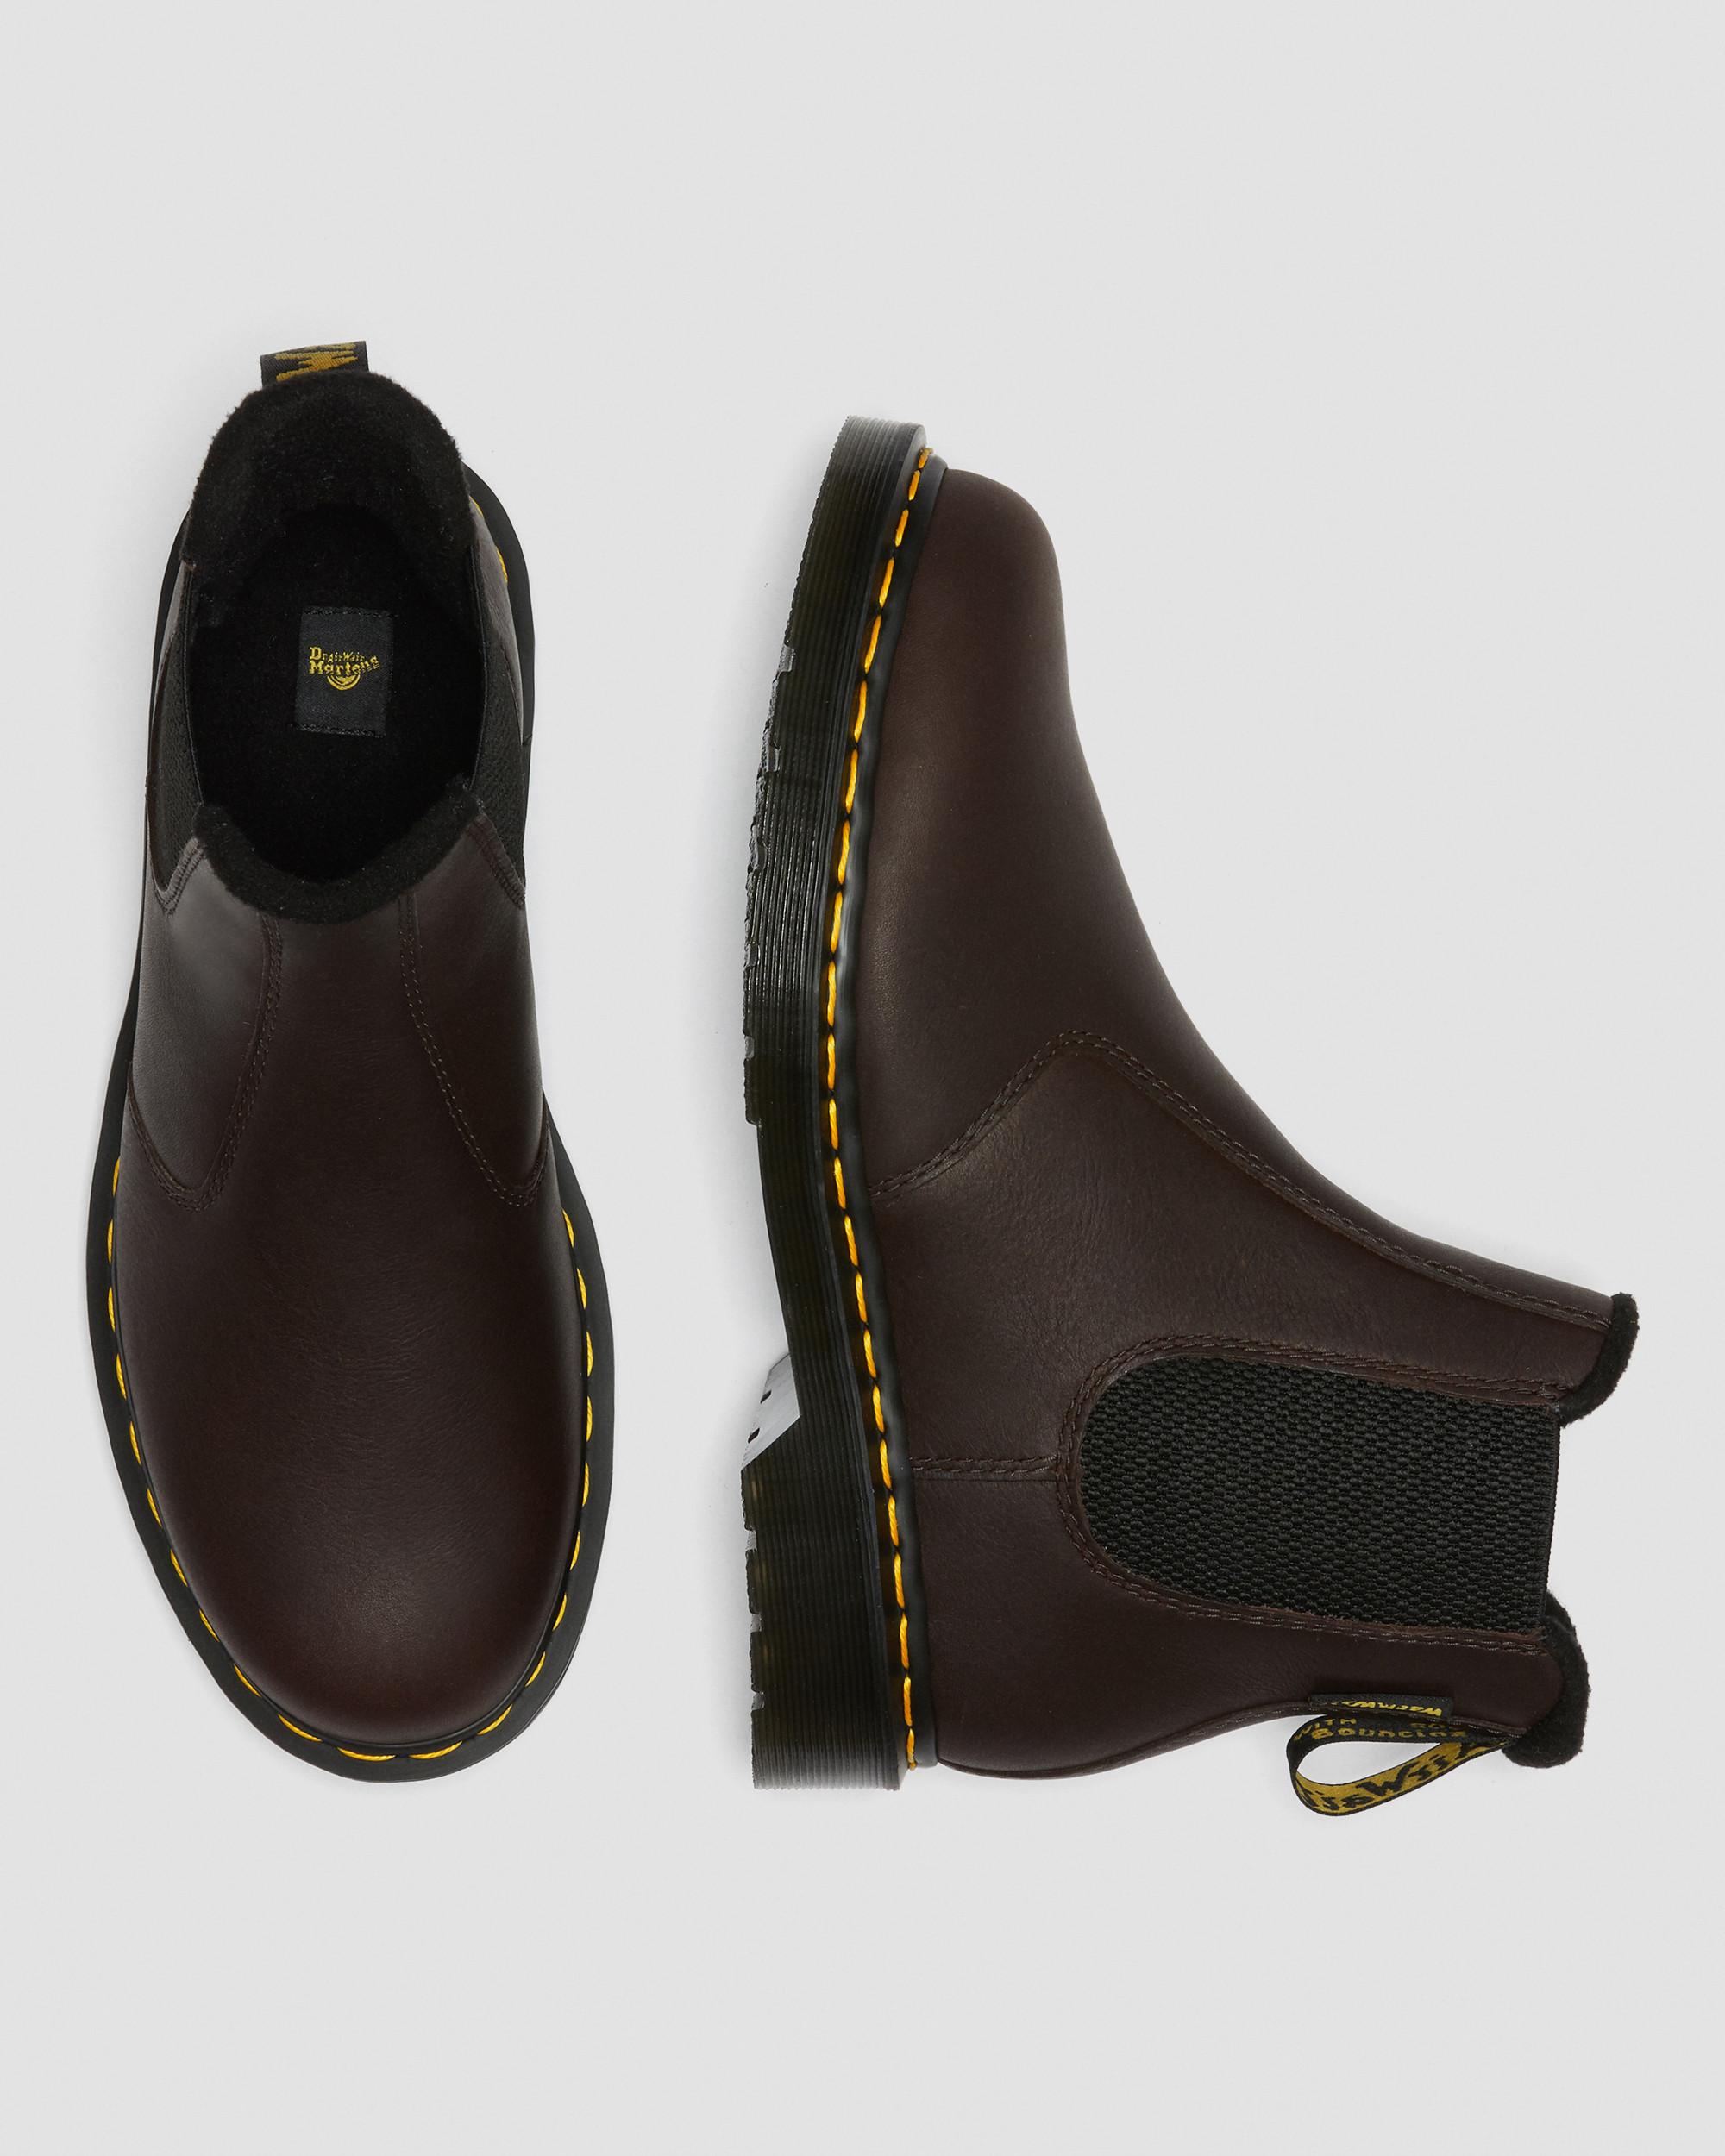 2976 Warmwair Valor Wp Leather Chelsea Boots in Dark Brown